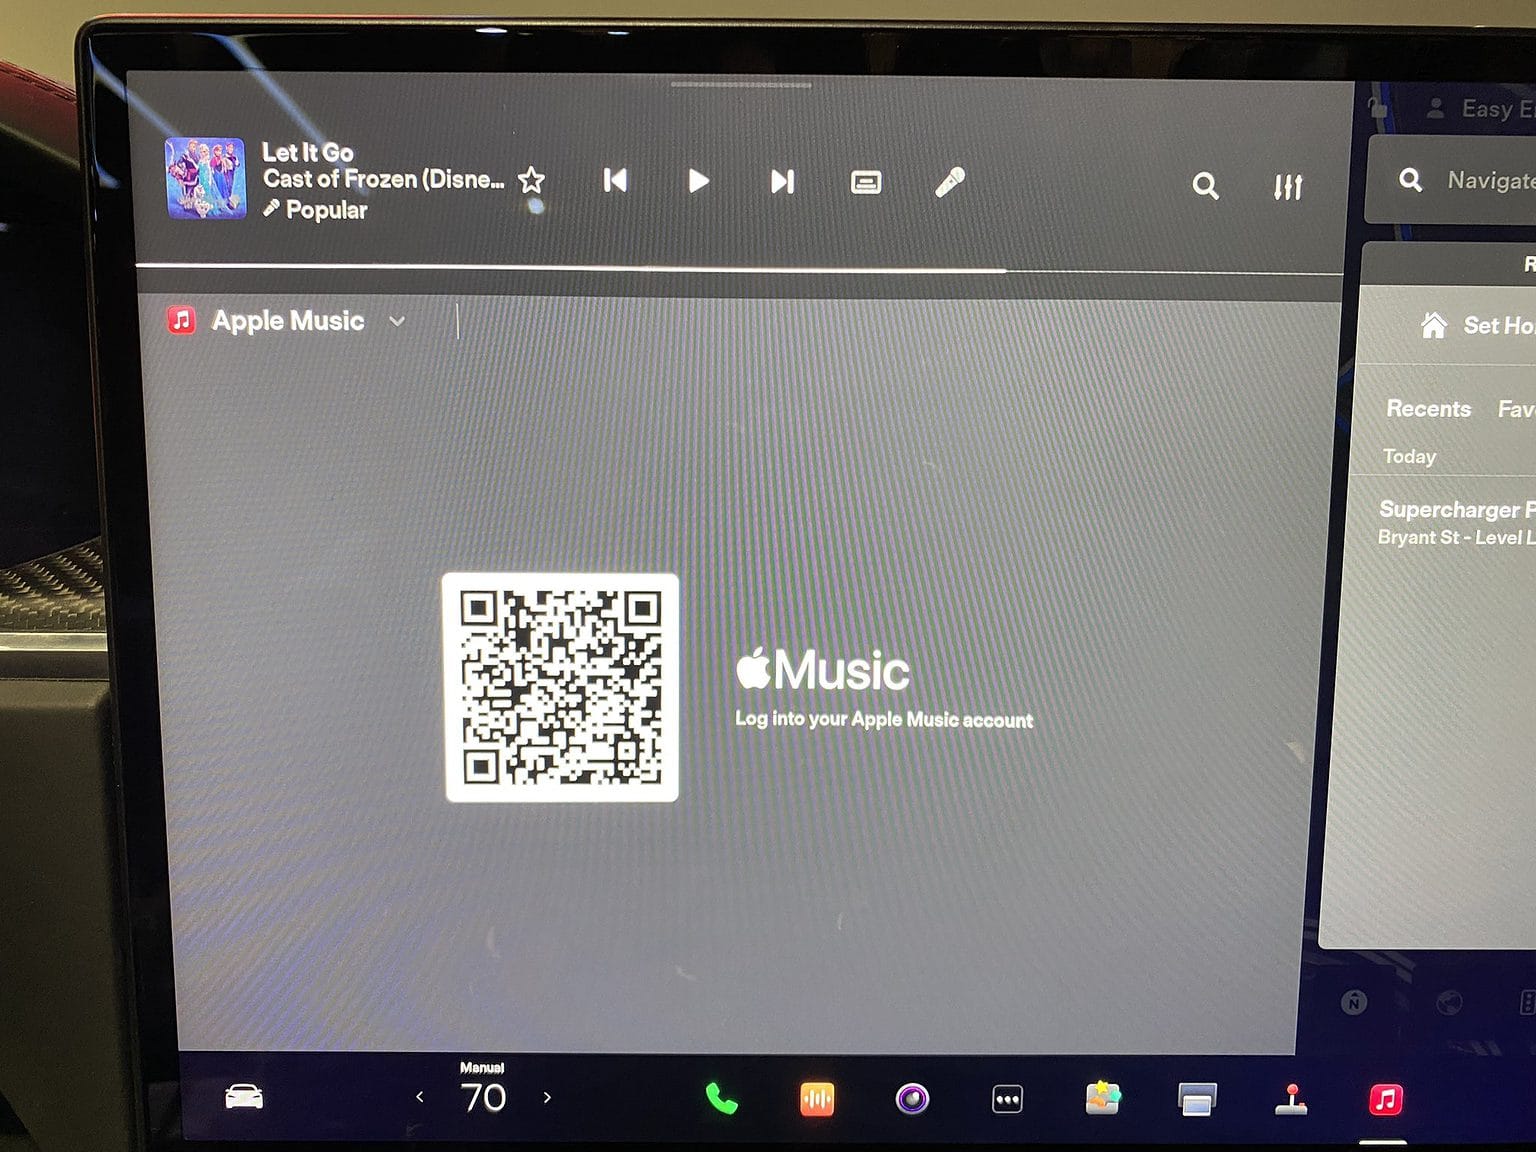 Tesla's interface in the museum exhibit showed Apple Music integration.